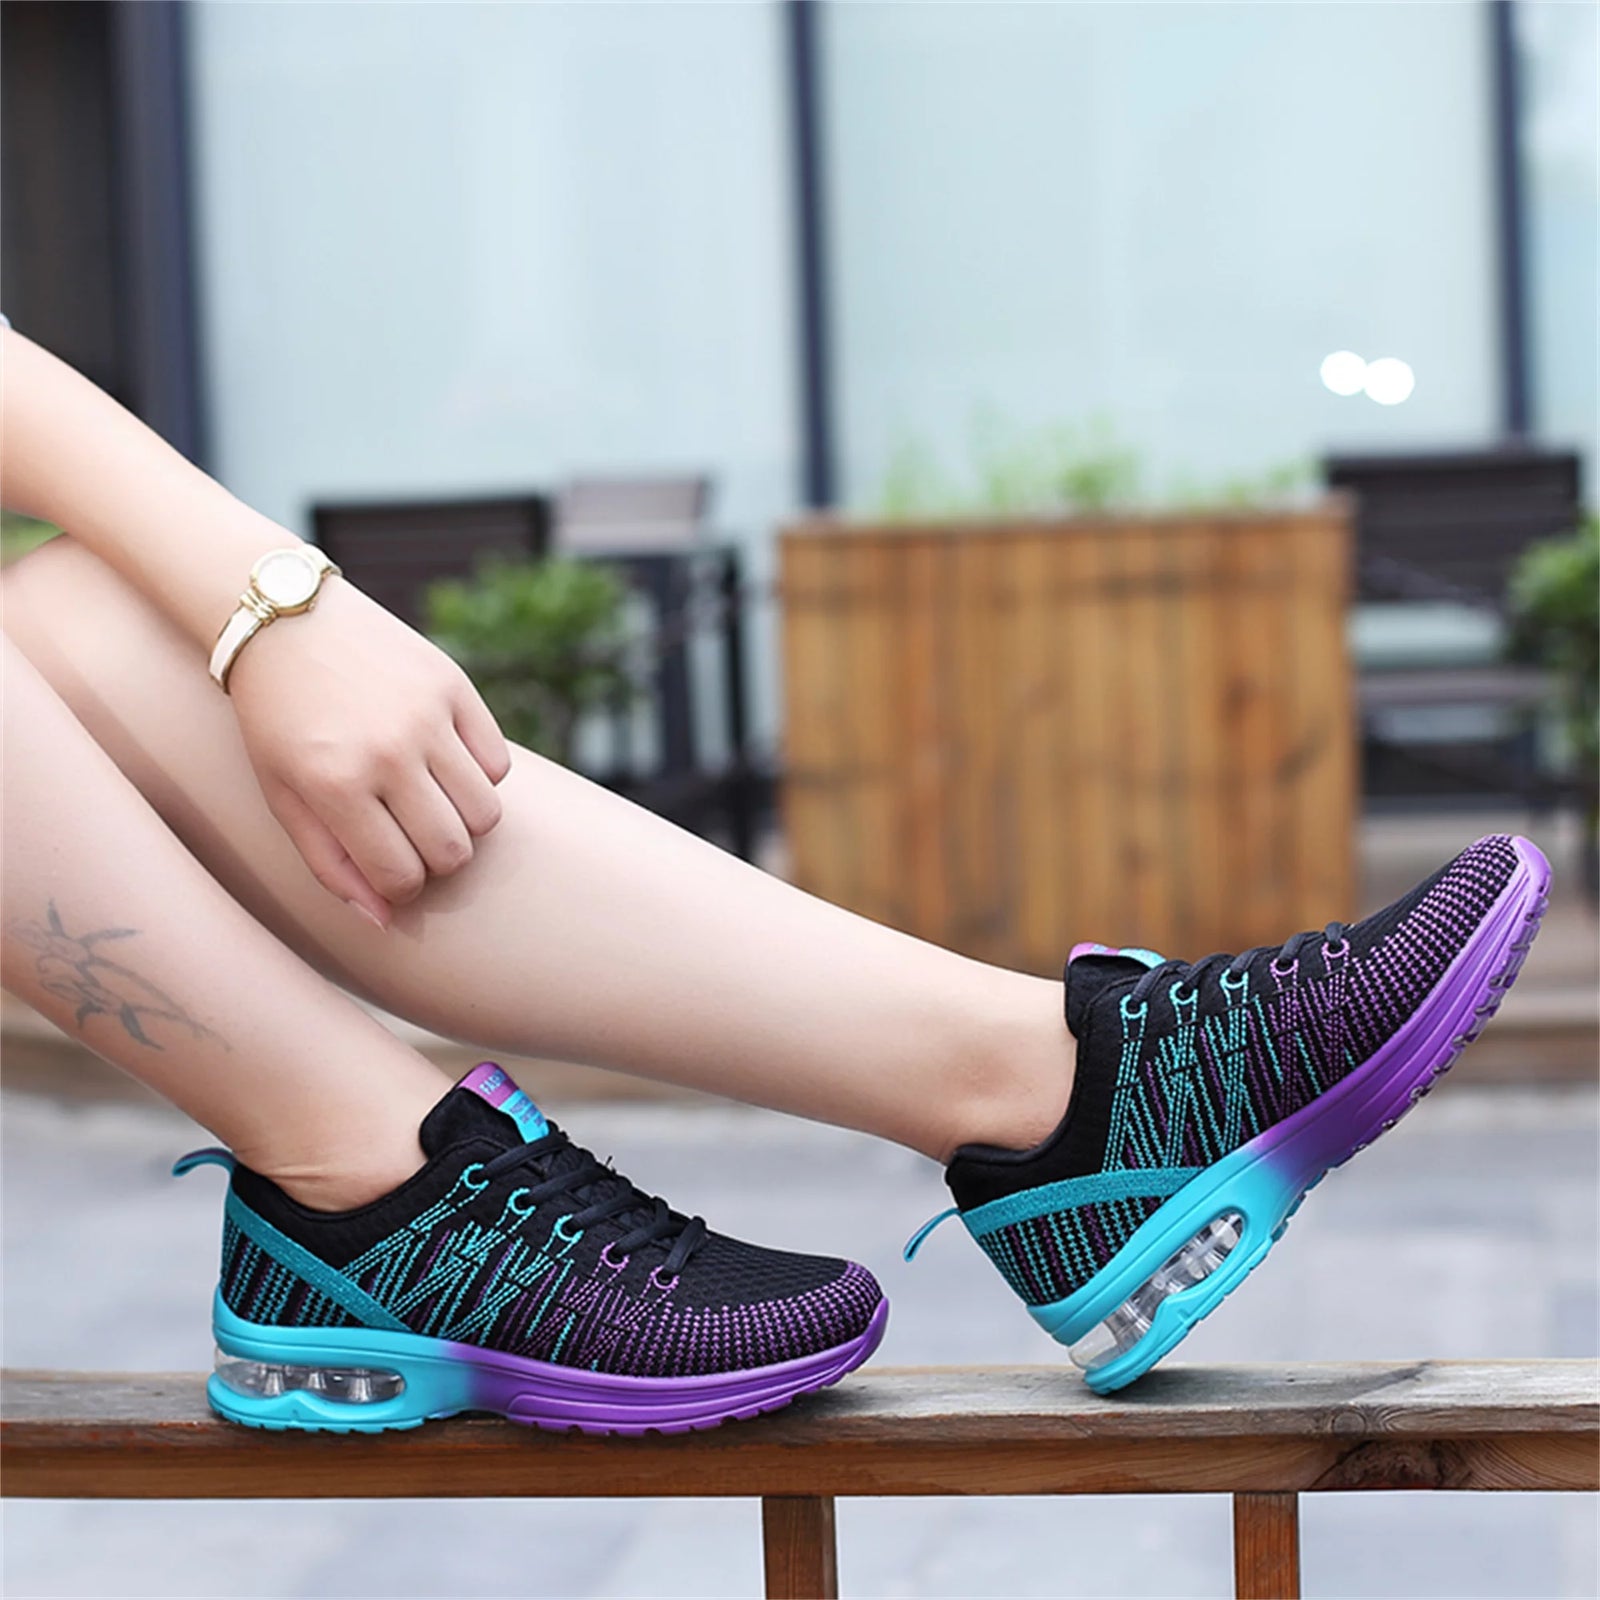 Sneaker for Women Breathable Athletic Air Cushion Running Shoes Lightweight Sport Shoes